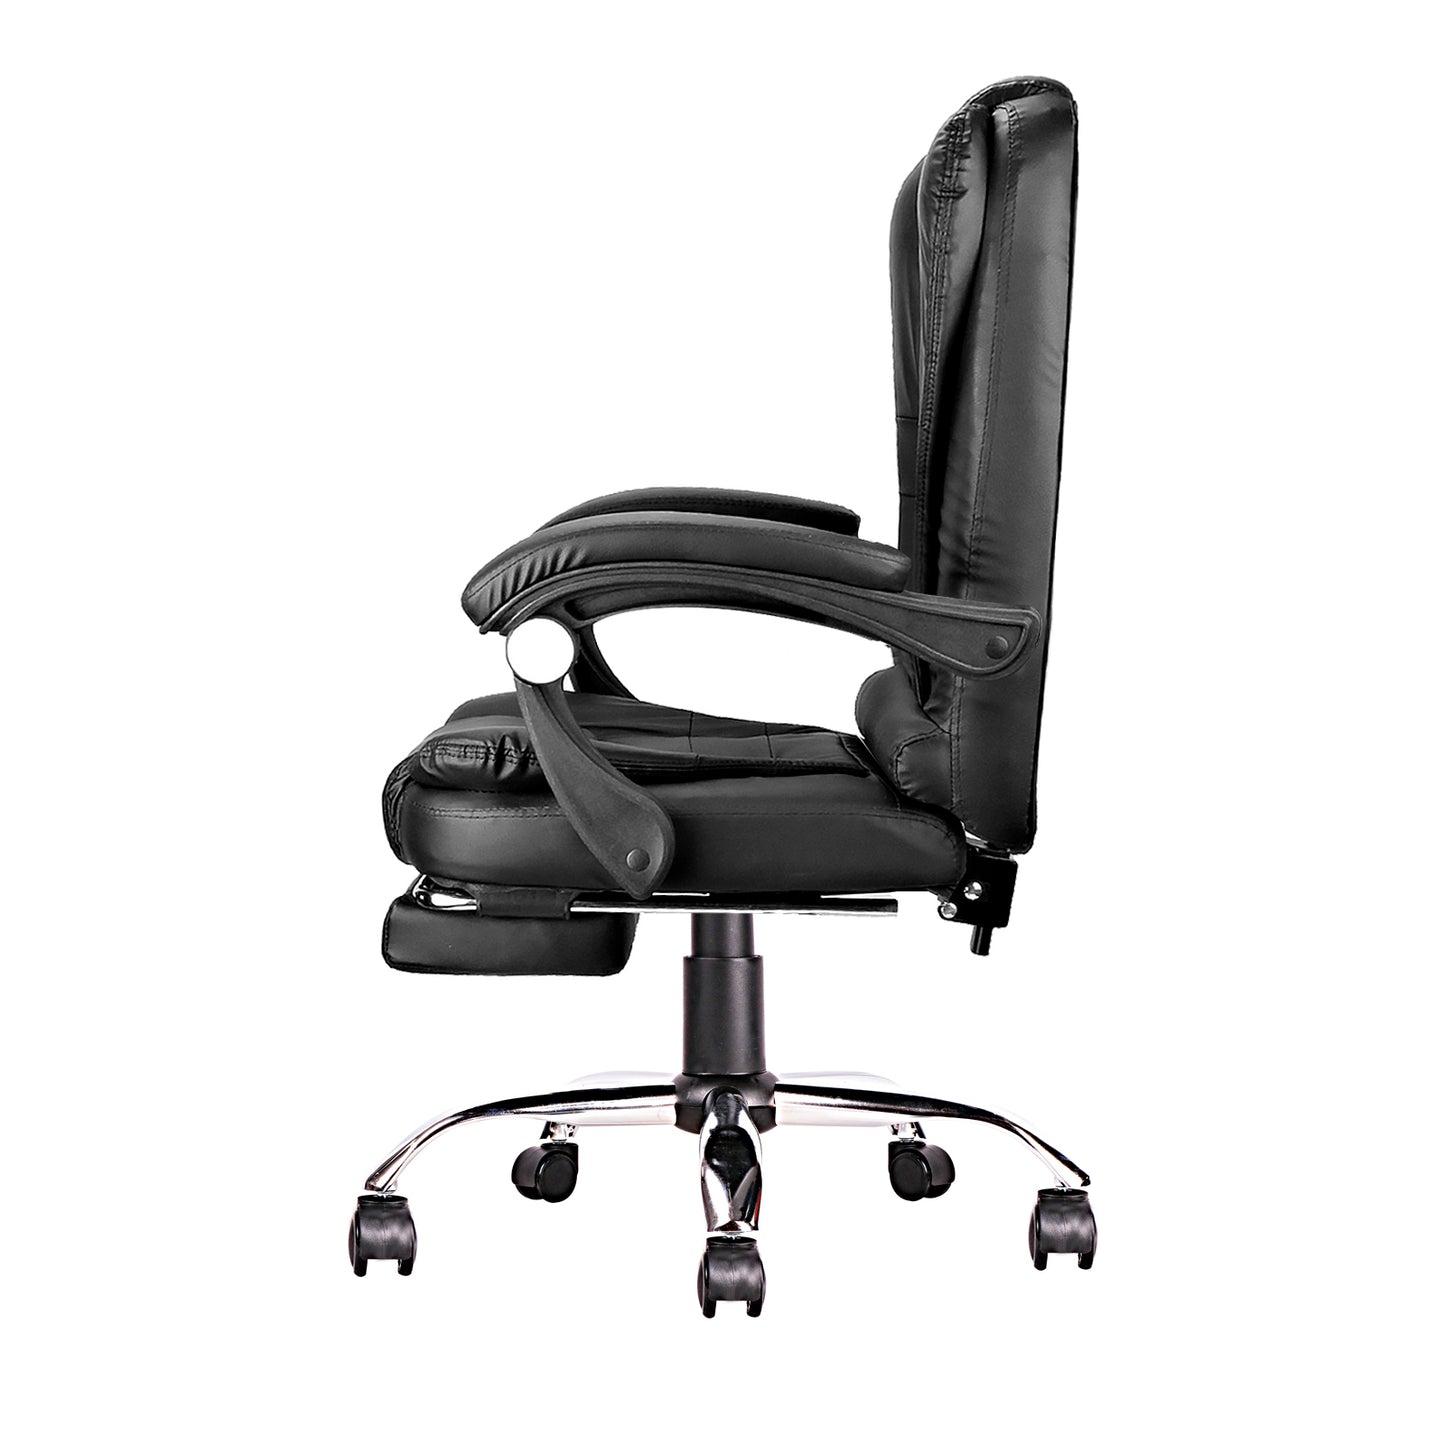 High-back office chair, adjustable ergonomic office chair, computer desk chair with lumbar support and foot cushion, suitable for home office use.